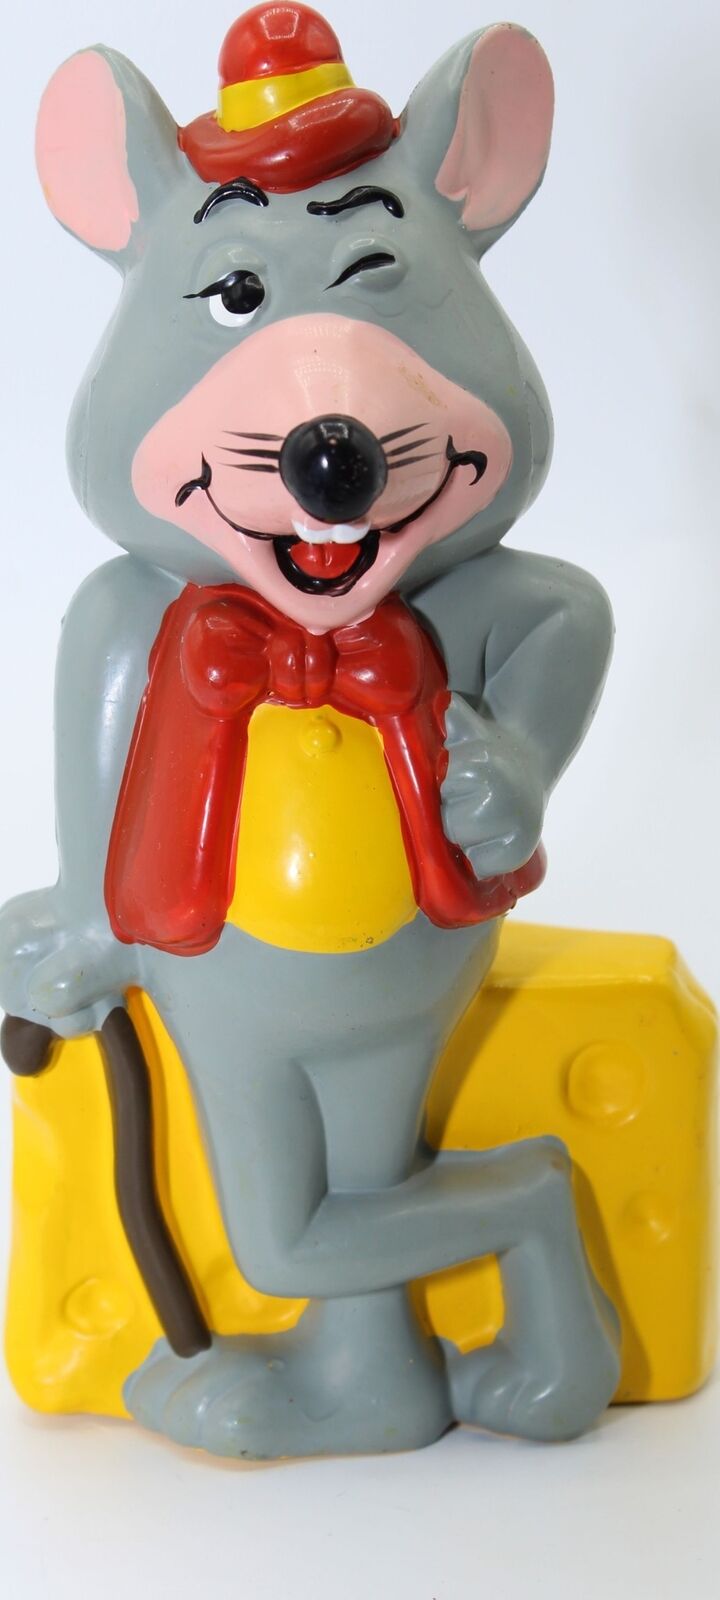 Vintage 1985 Chuck-E-Cheese Pizza Winking Mouse Coin Piggy Bank Figurine 6.5